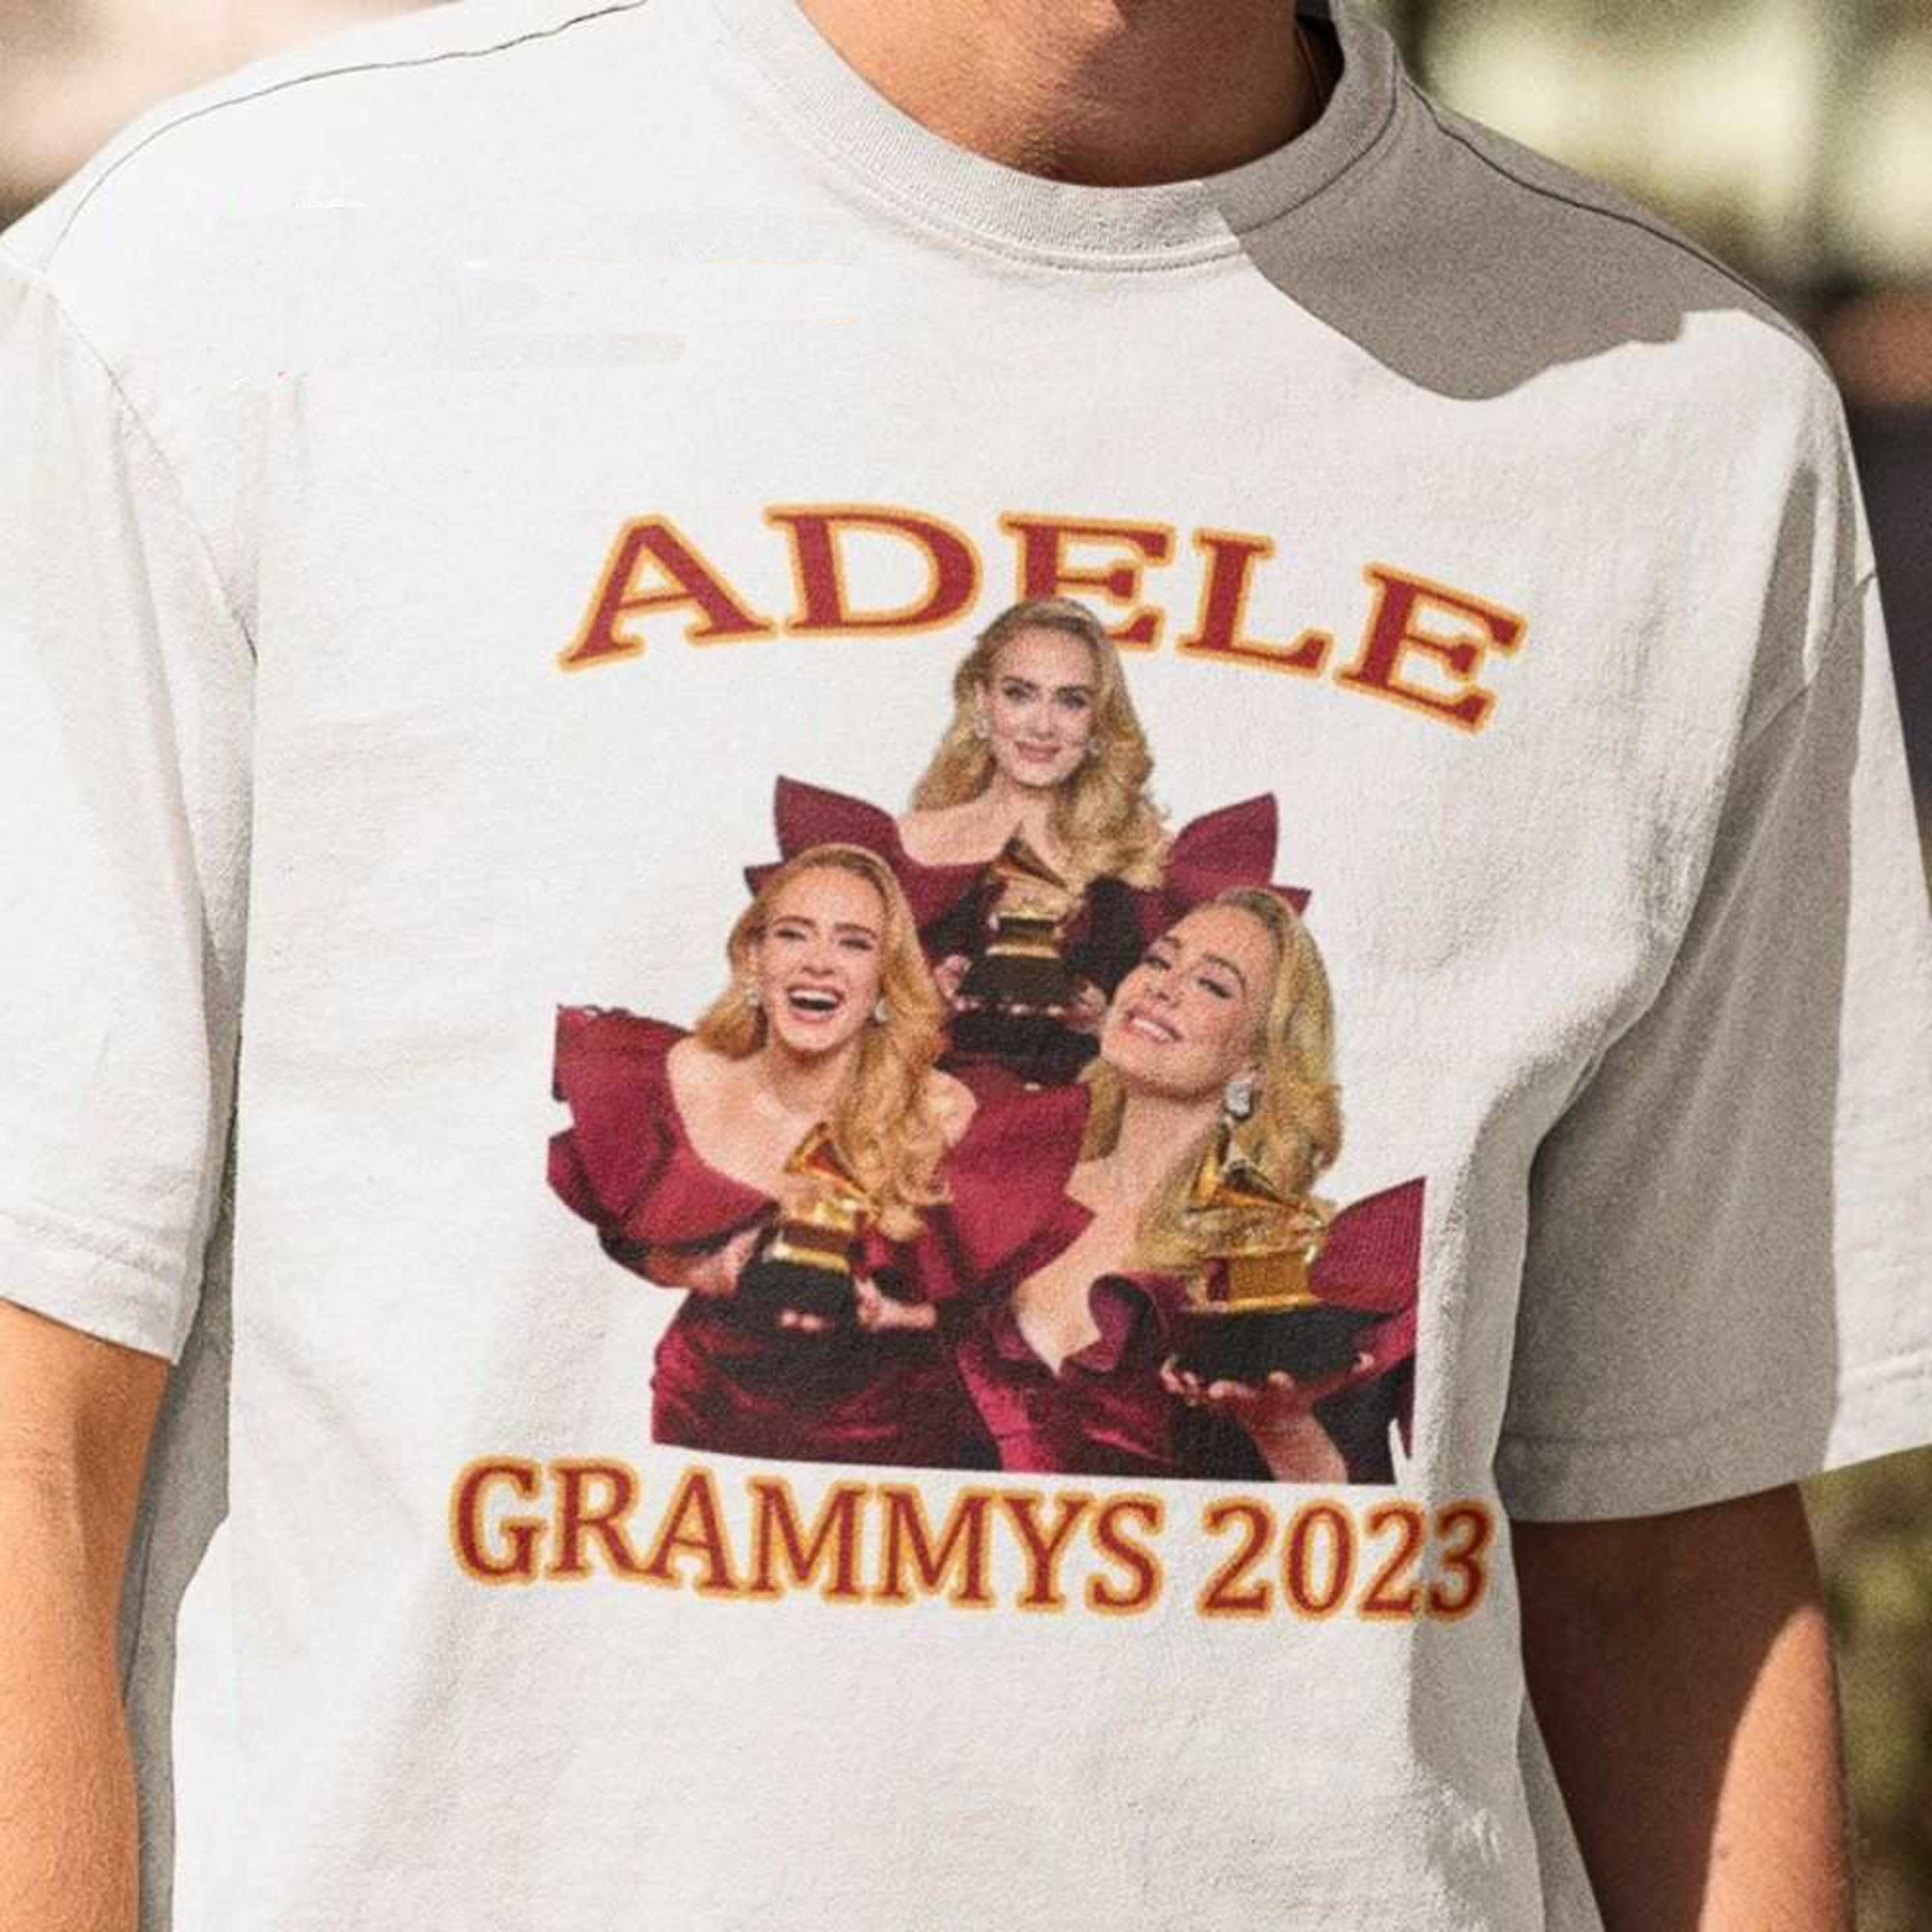 Discover Adele The Grammys 2023, Adele Best Pop Solo Performance 2023 Grammys T-Shirt